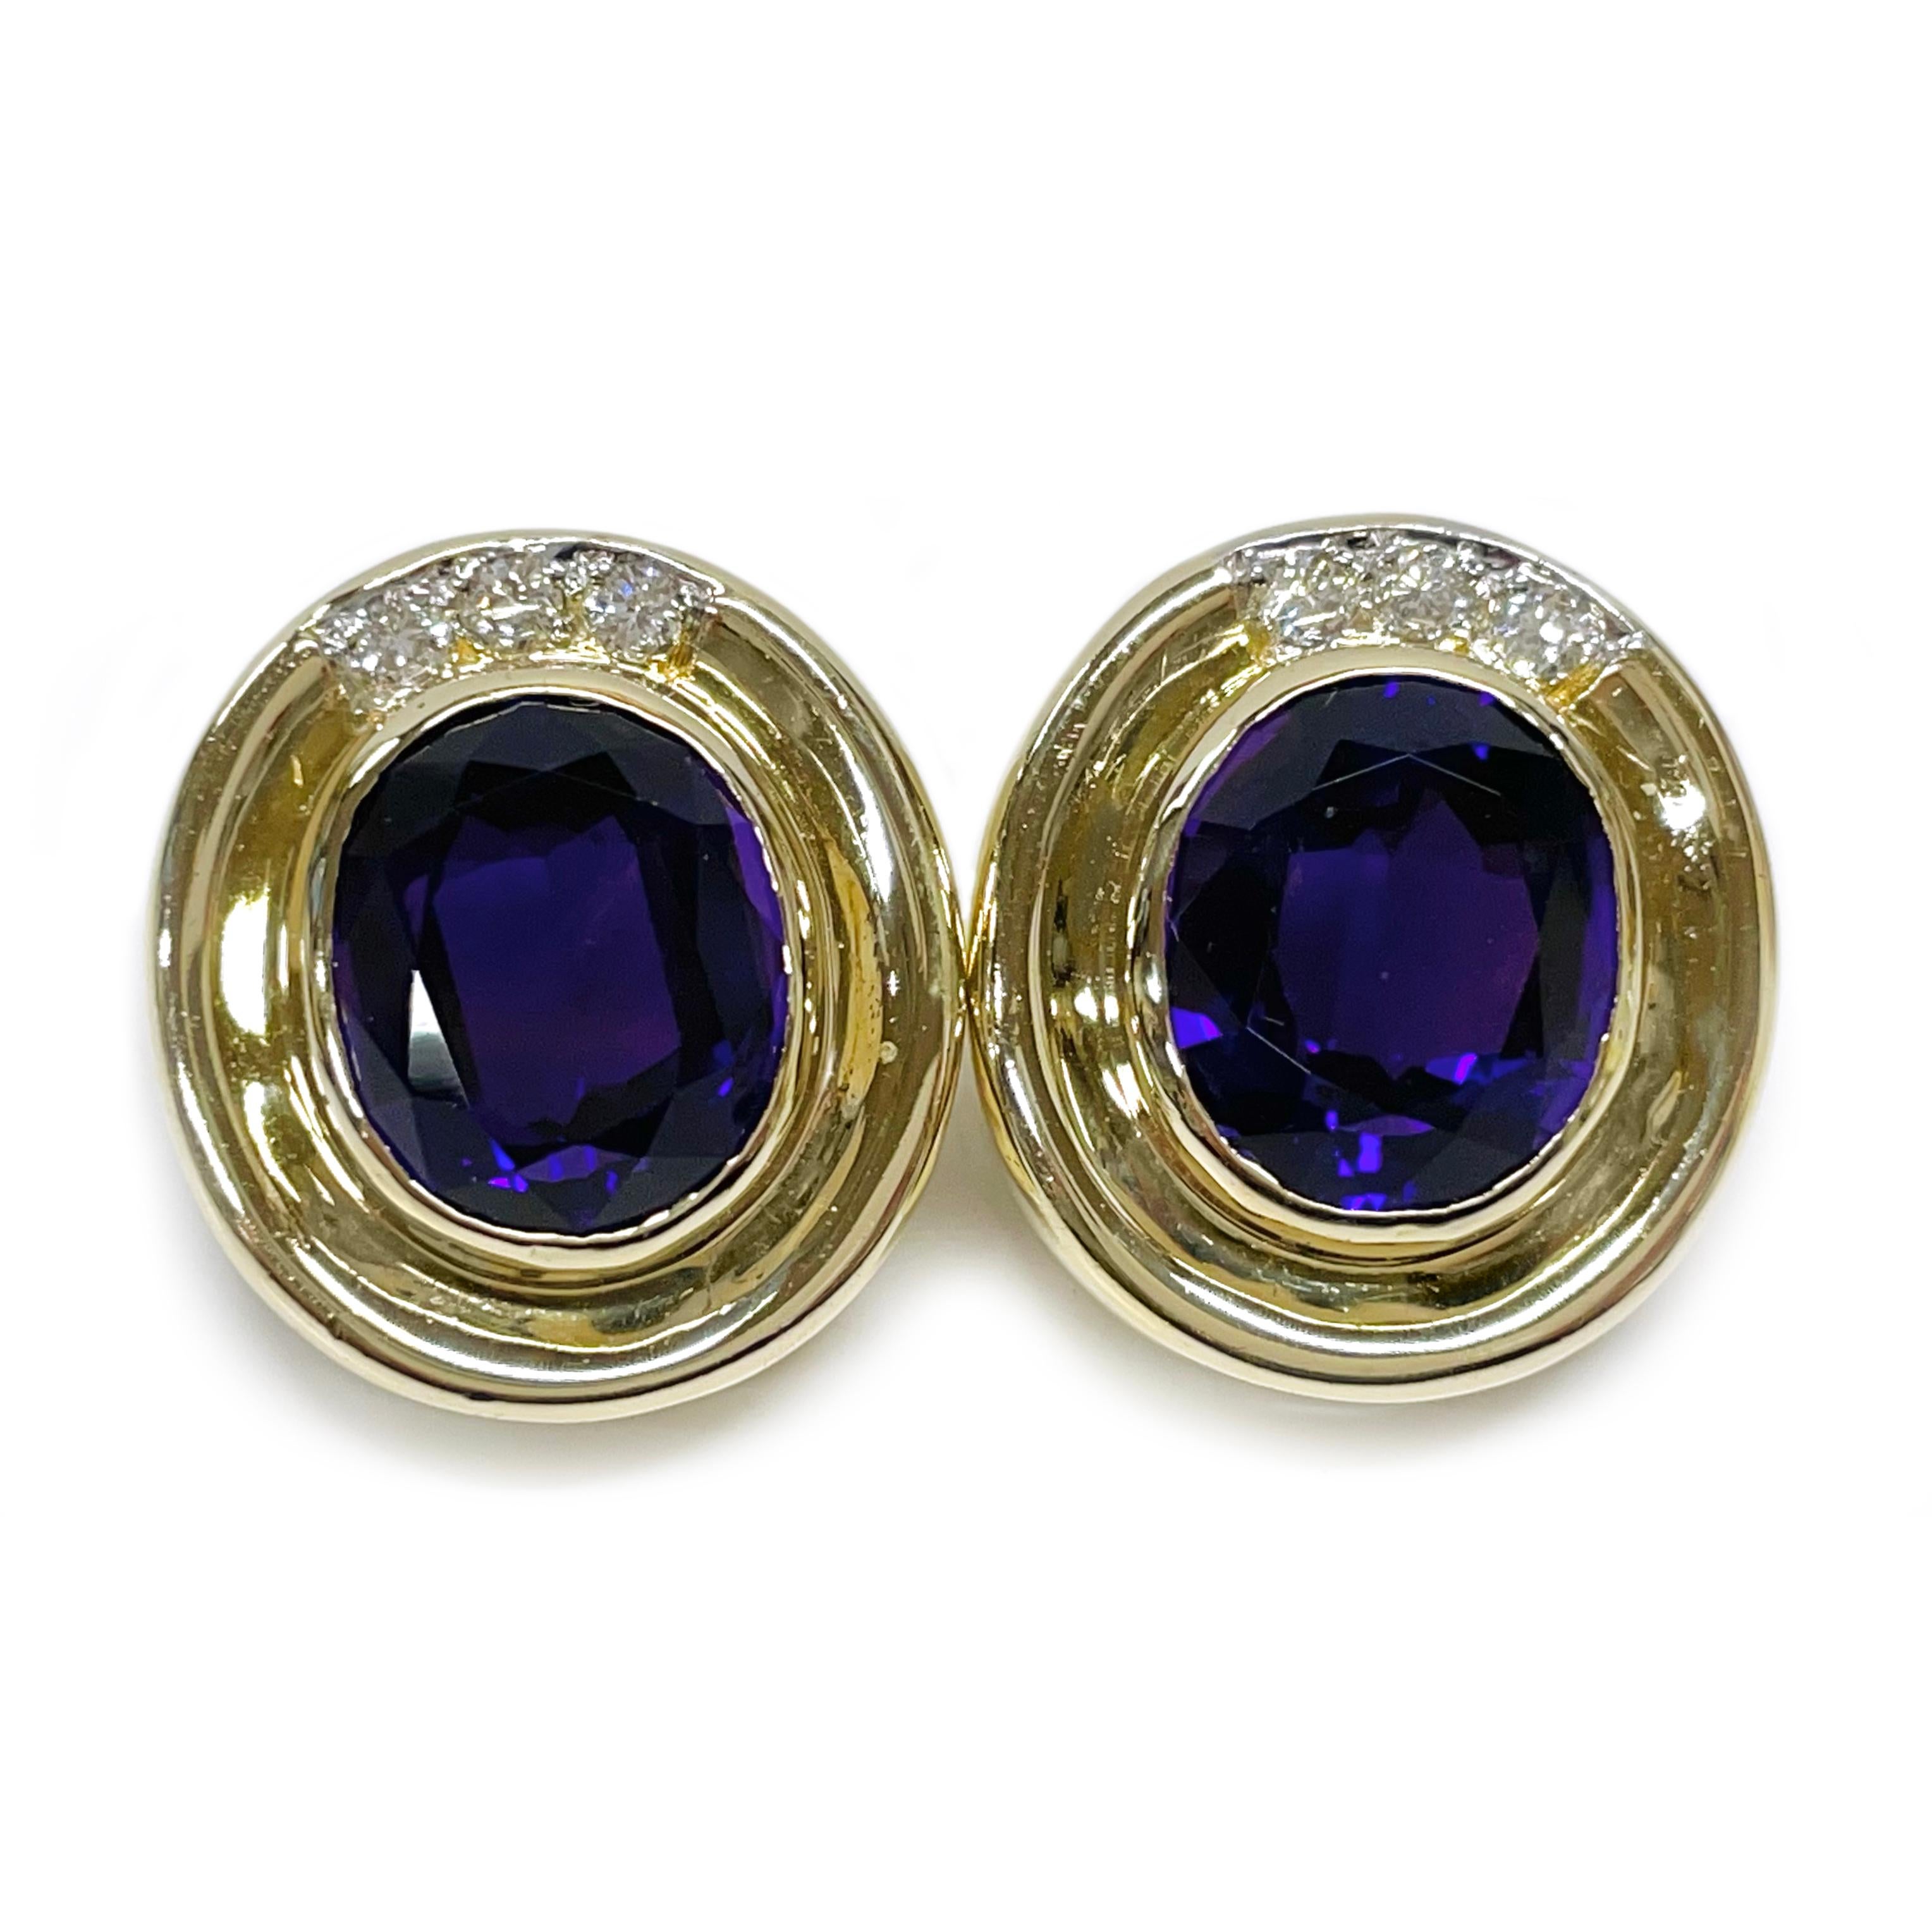 14 Karat Amethyst Diamond Earrings. Each earring features a 11.6 x 9.6mm oval bezel-set Amethyst cabochon 3.25ct with three round 2.5mm diamonds along the the wide gold bezel. The diamonds have a total carat weight of 0.30ct. The earrings have a